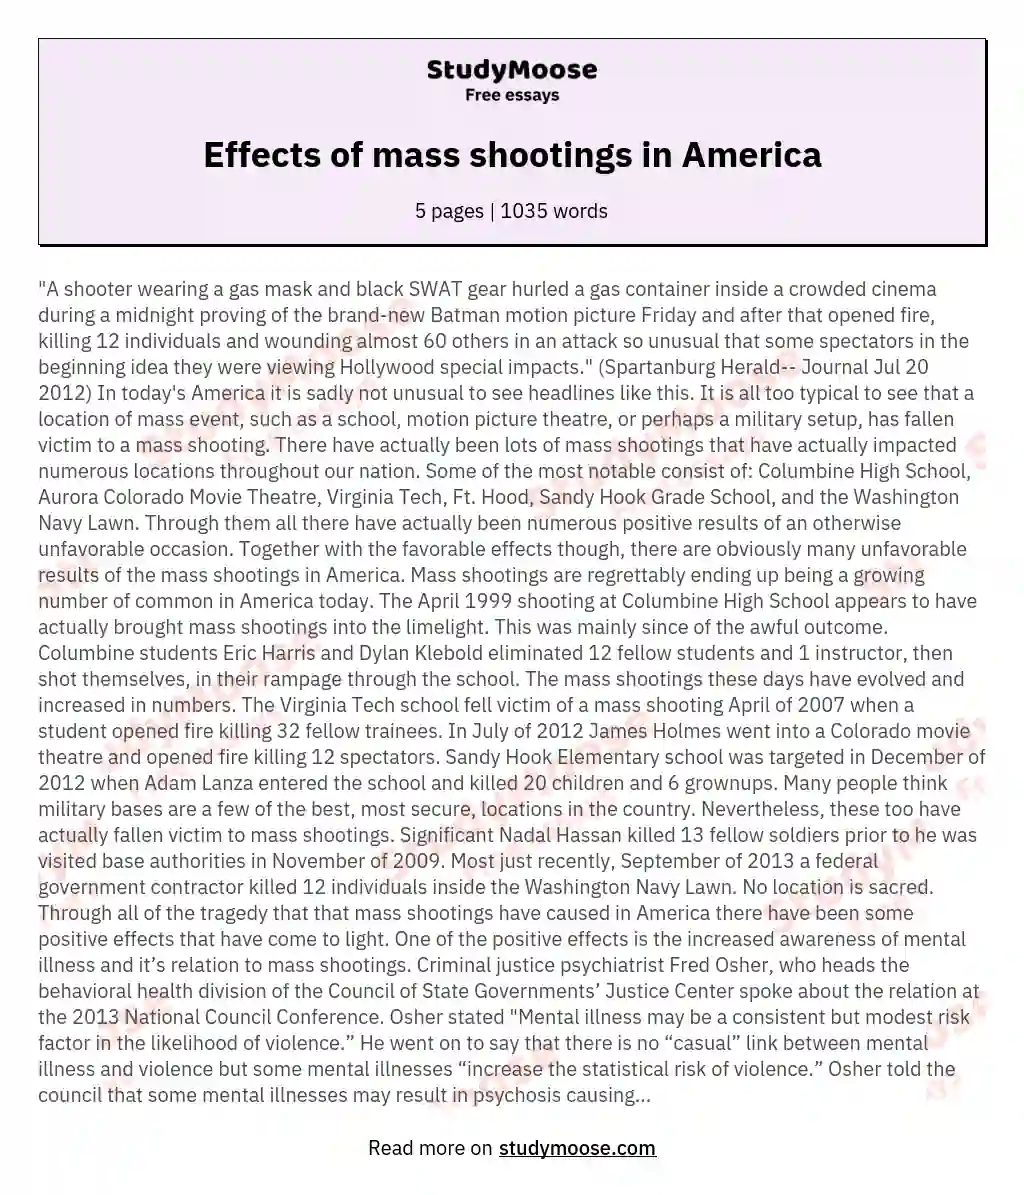 Effects of mass shootings in America essay